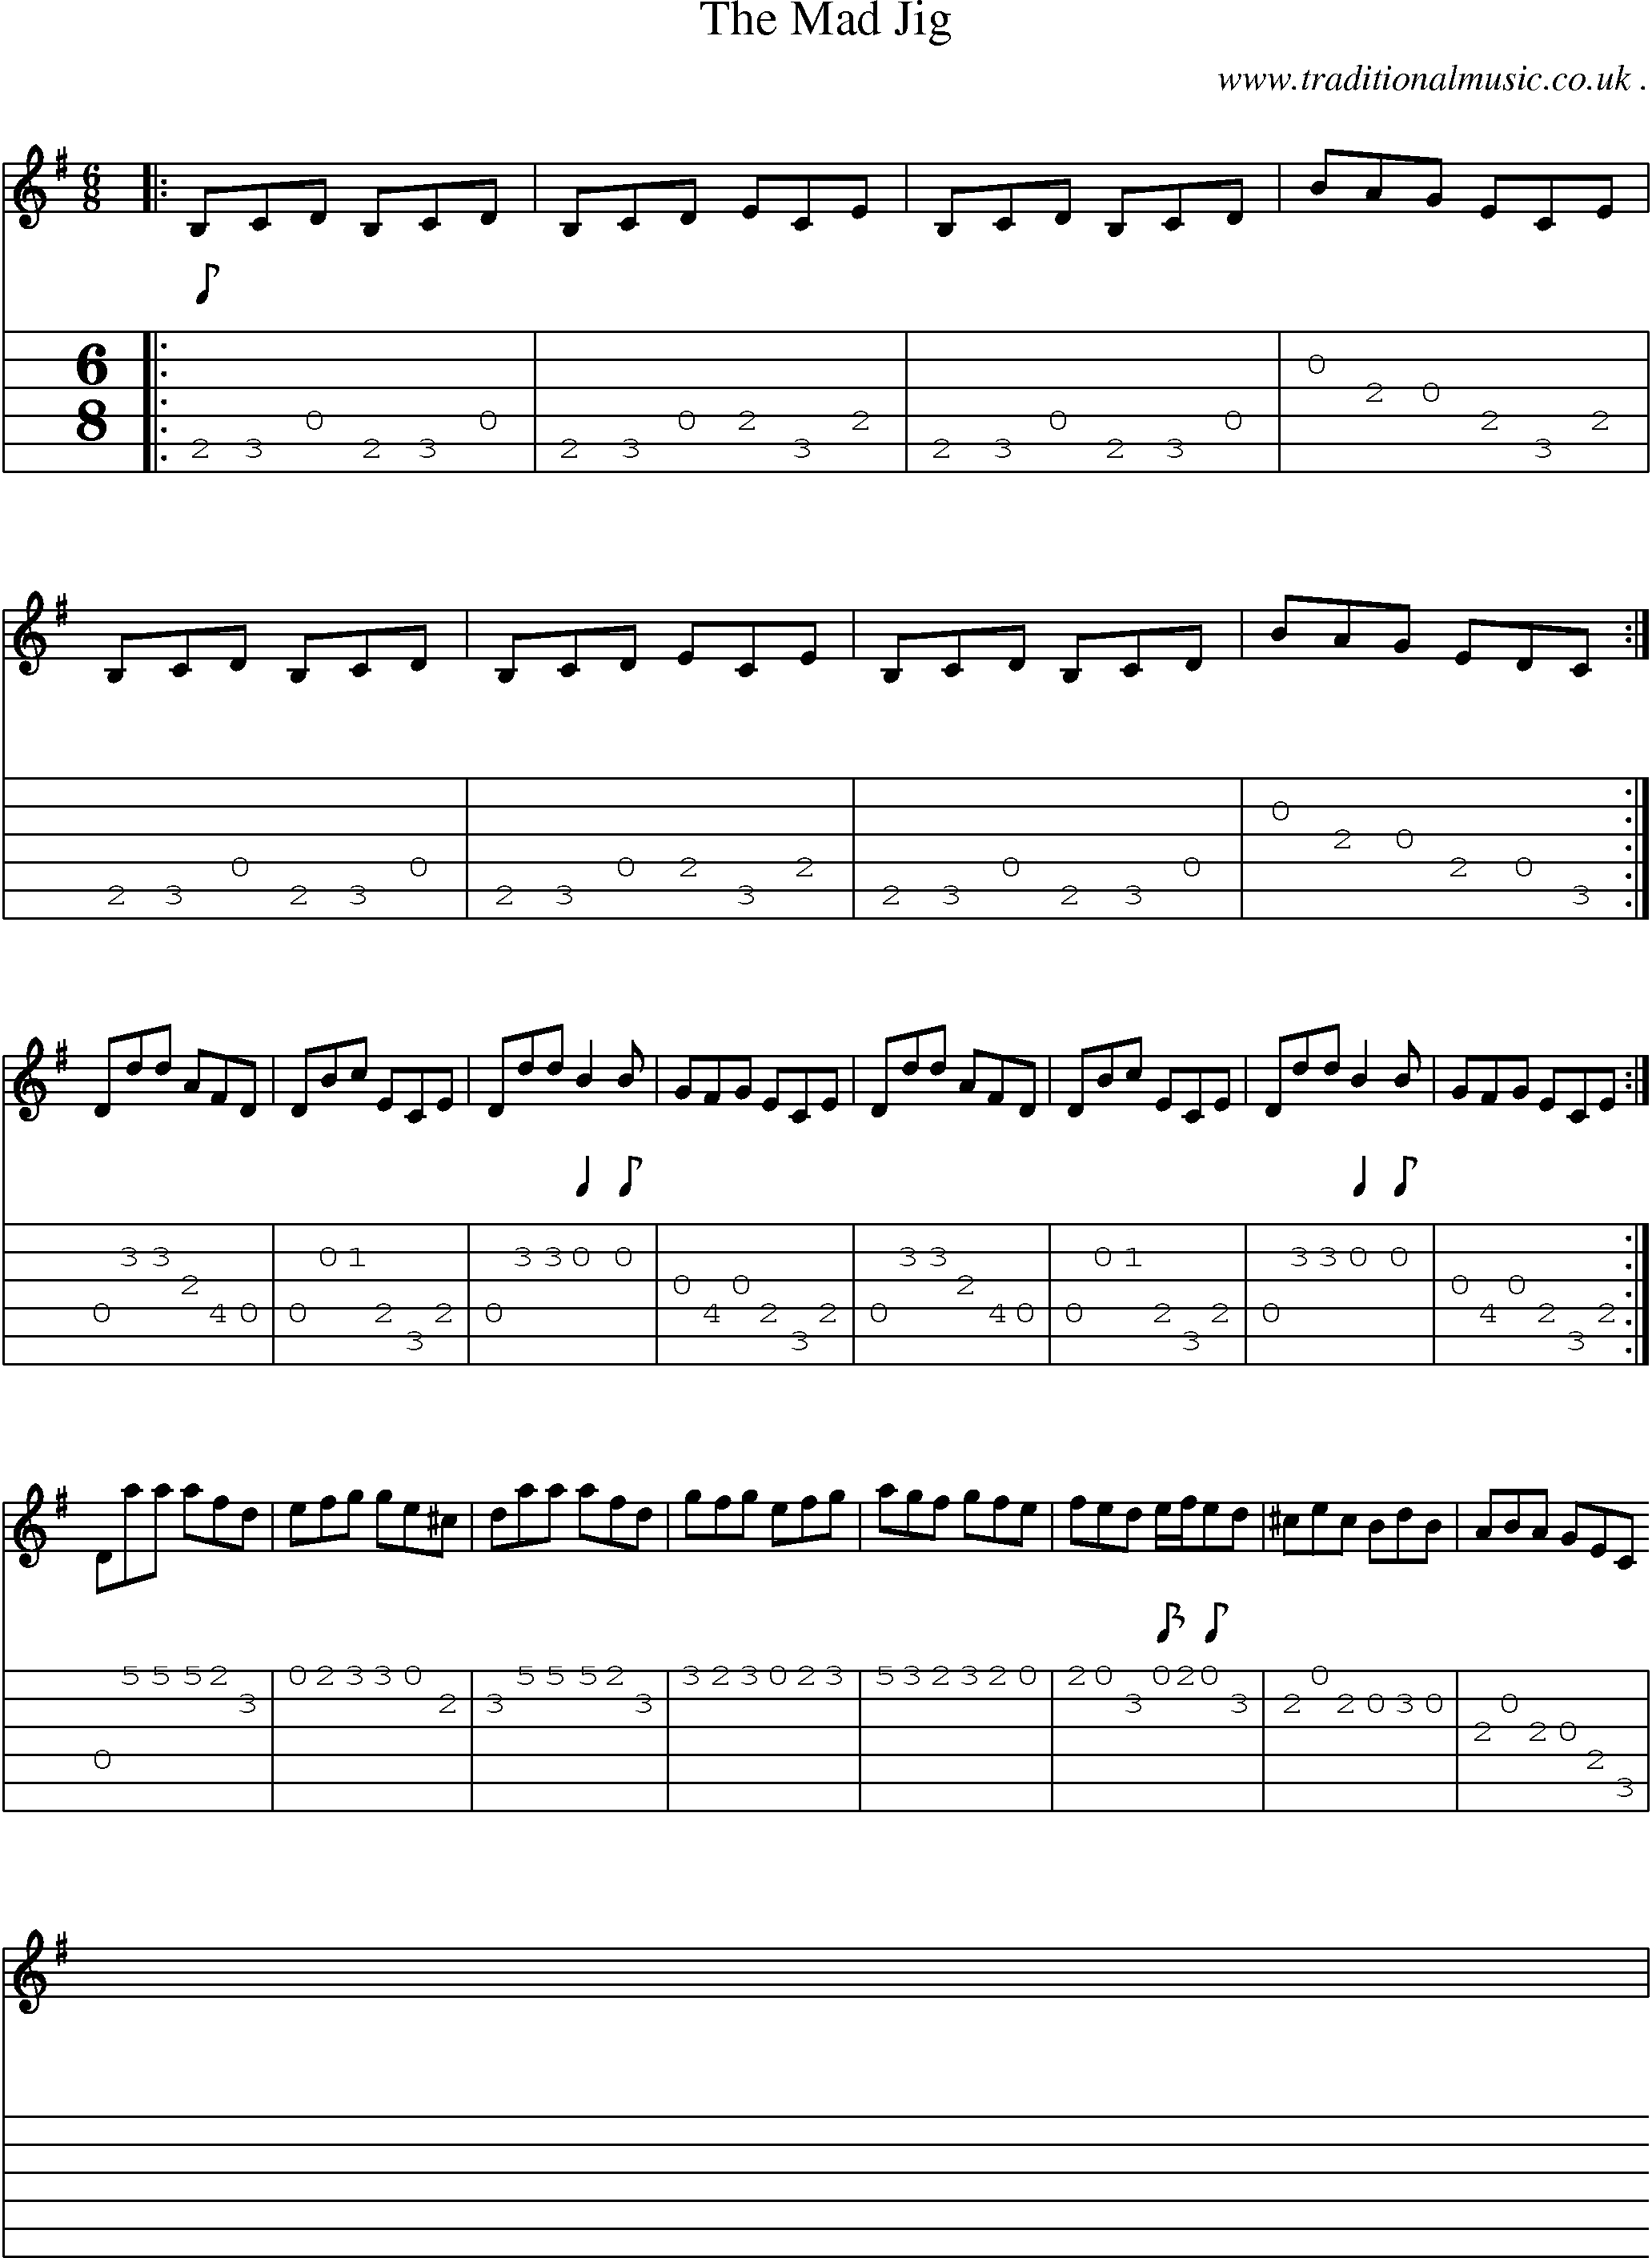 Sheet-Music and Guitar Tabs for The Mad Jig